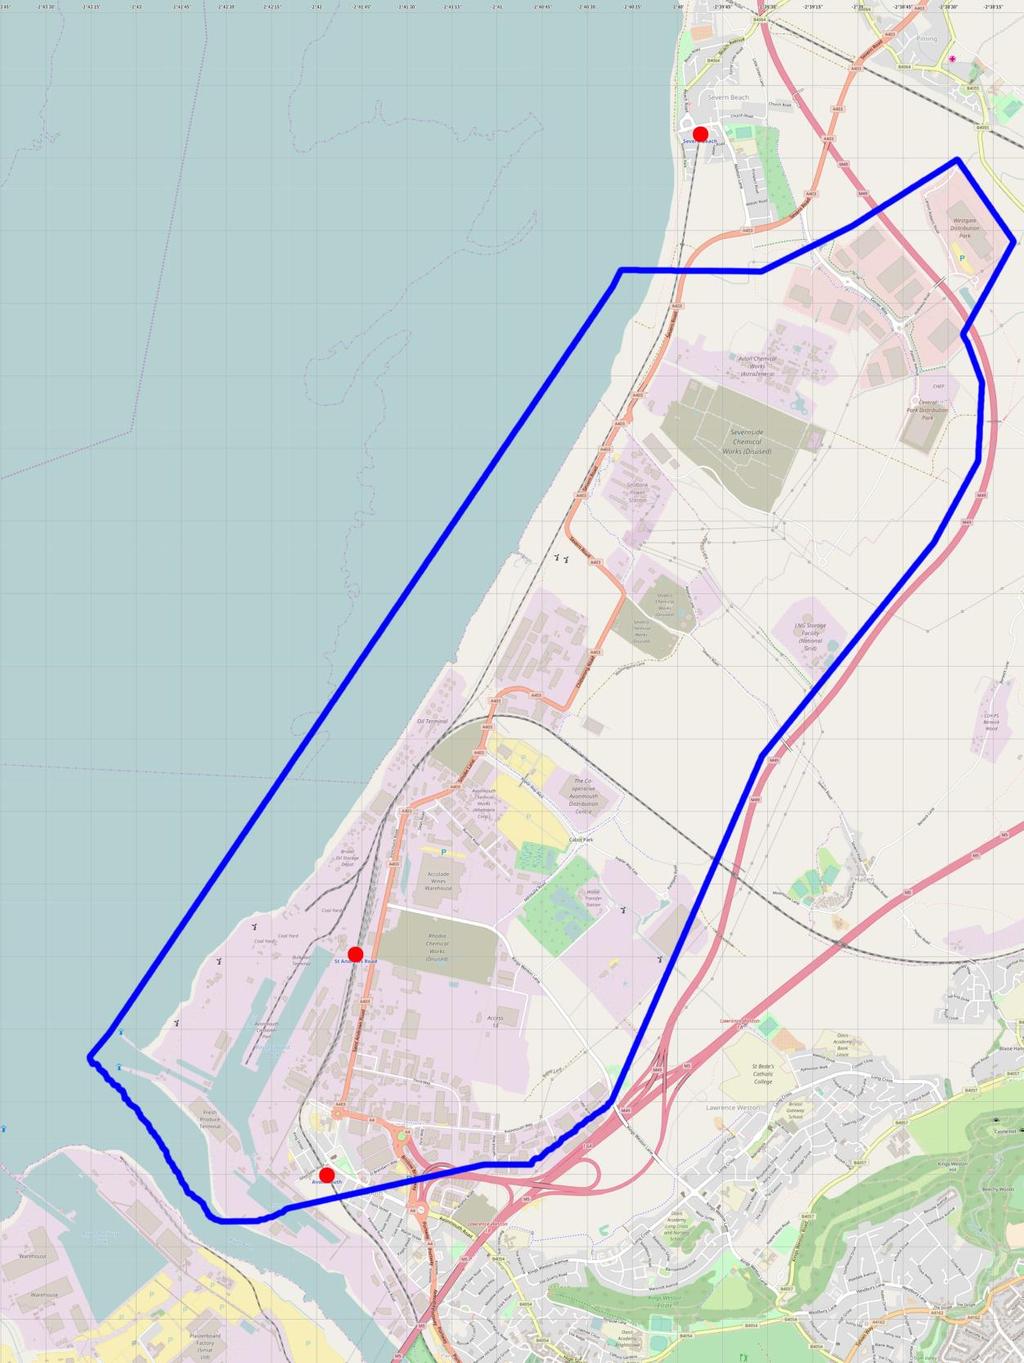 Indication of the area covered by